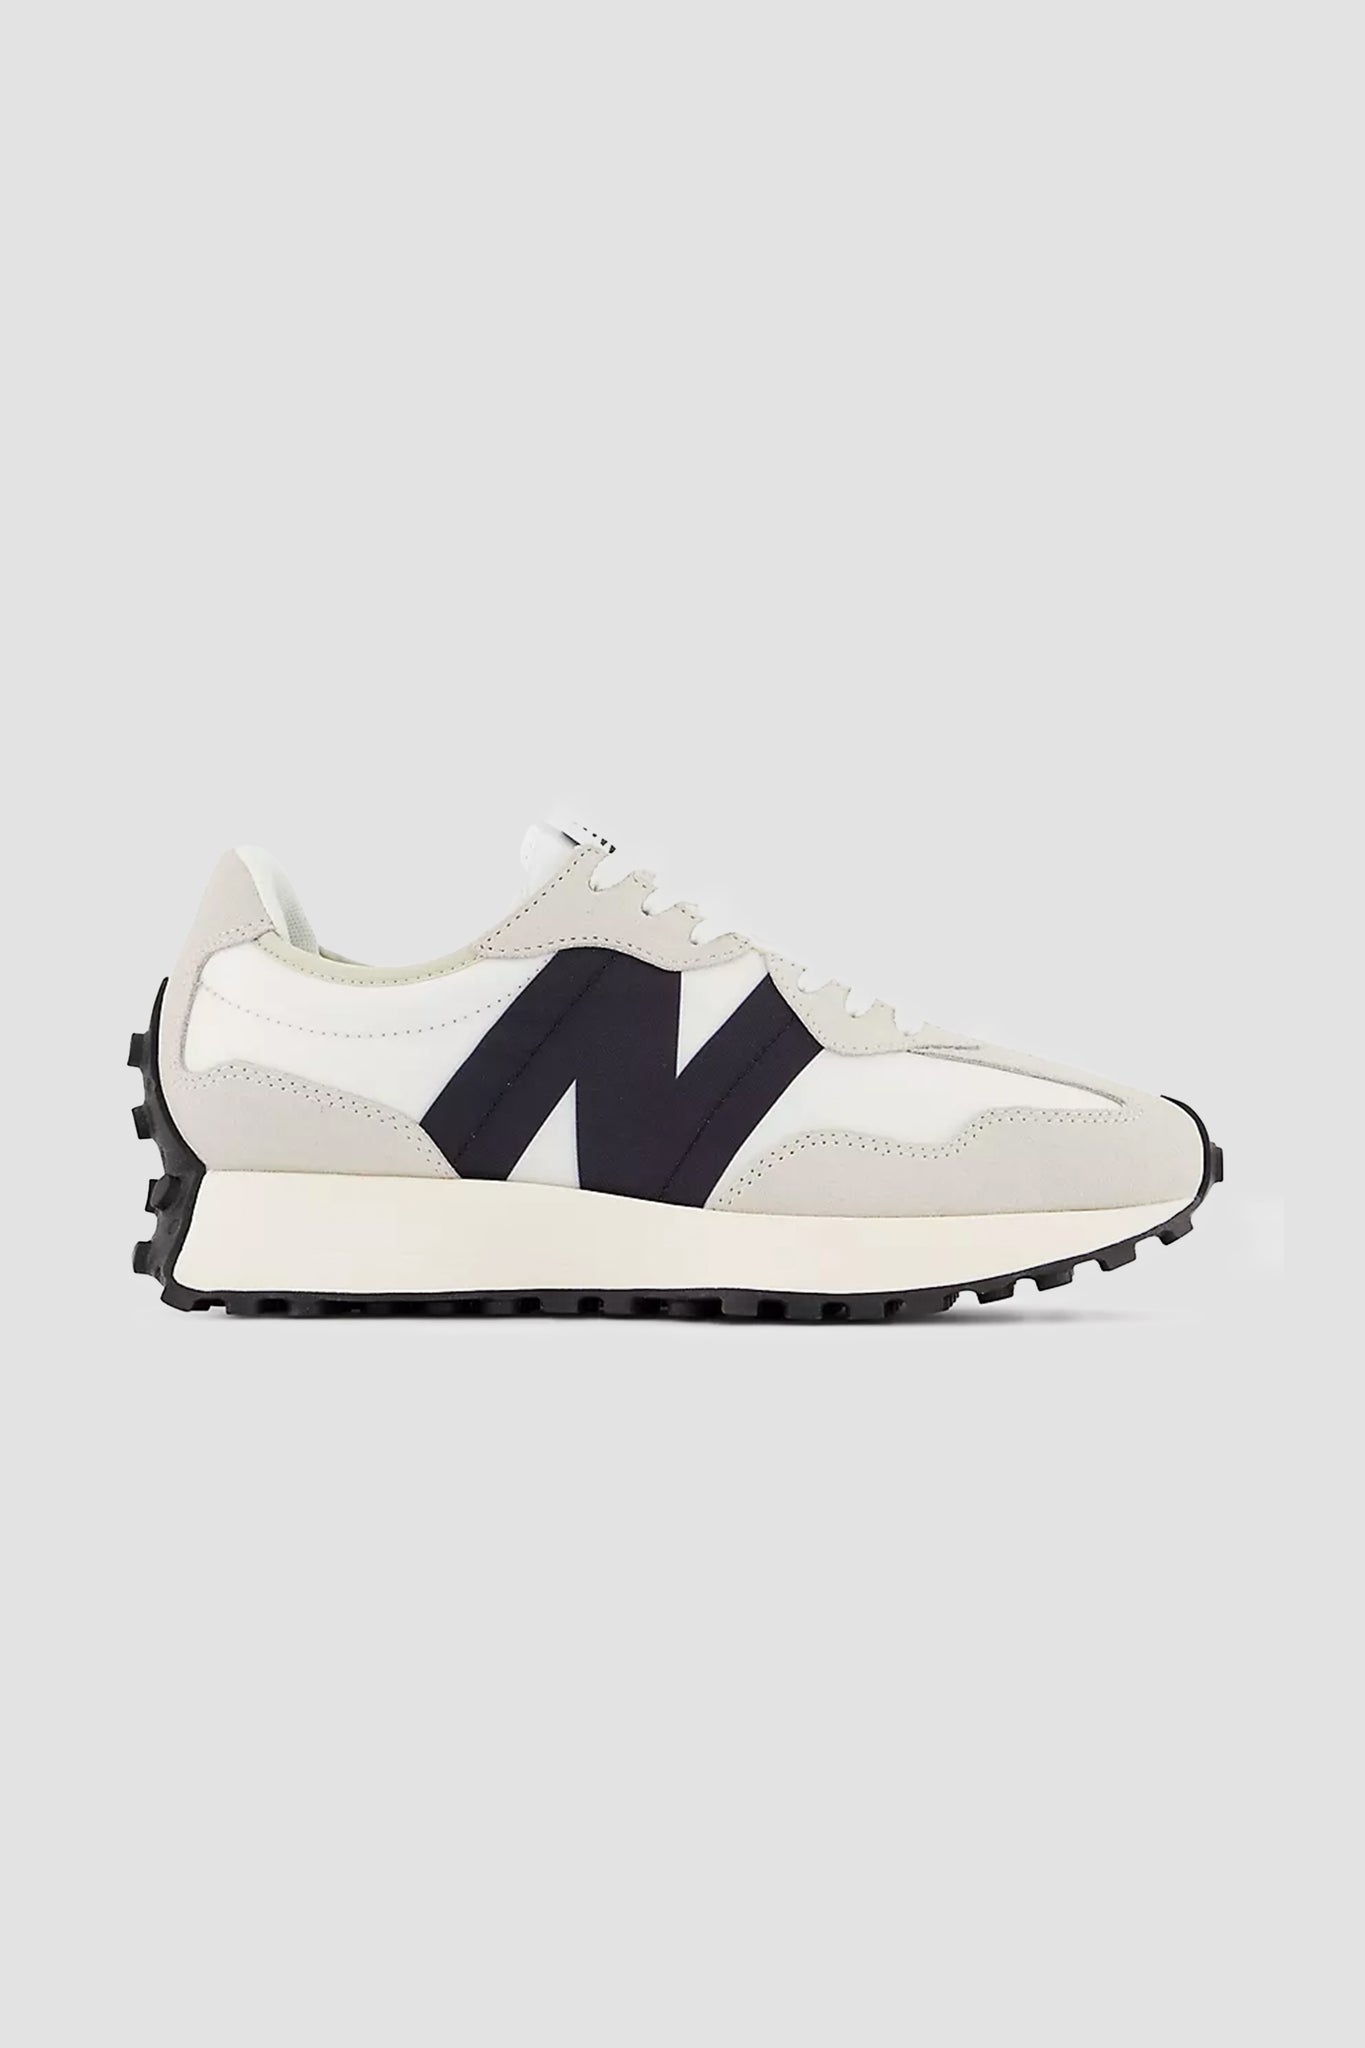 New Balance Women's 927 Sneaker in Sea Salt with White and Black